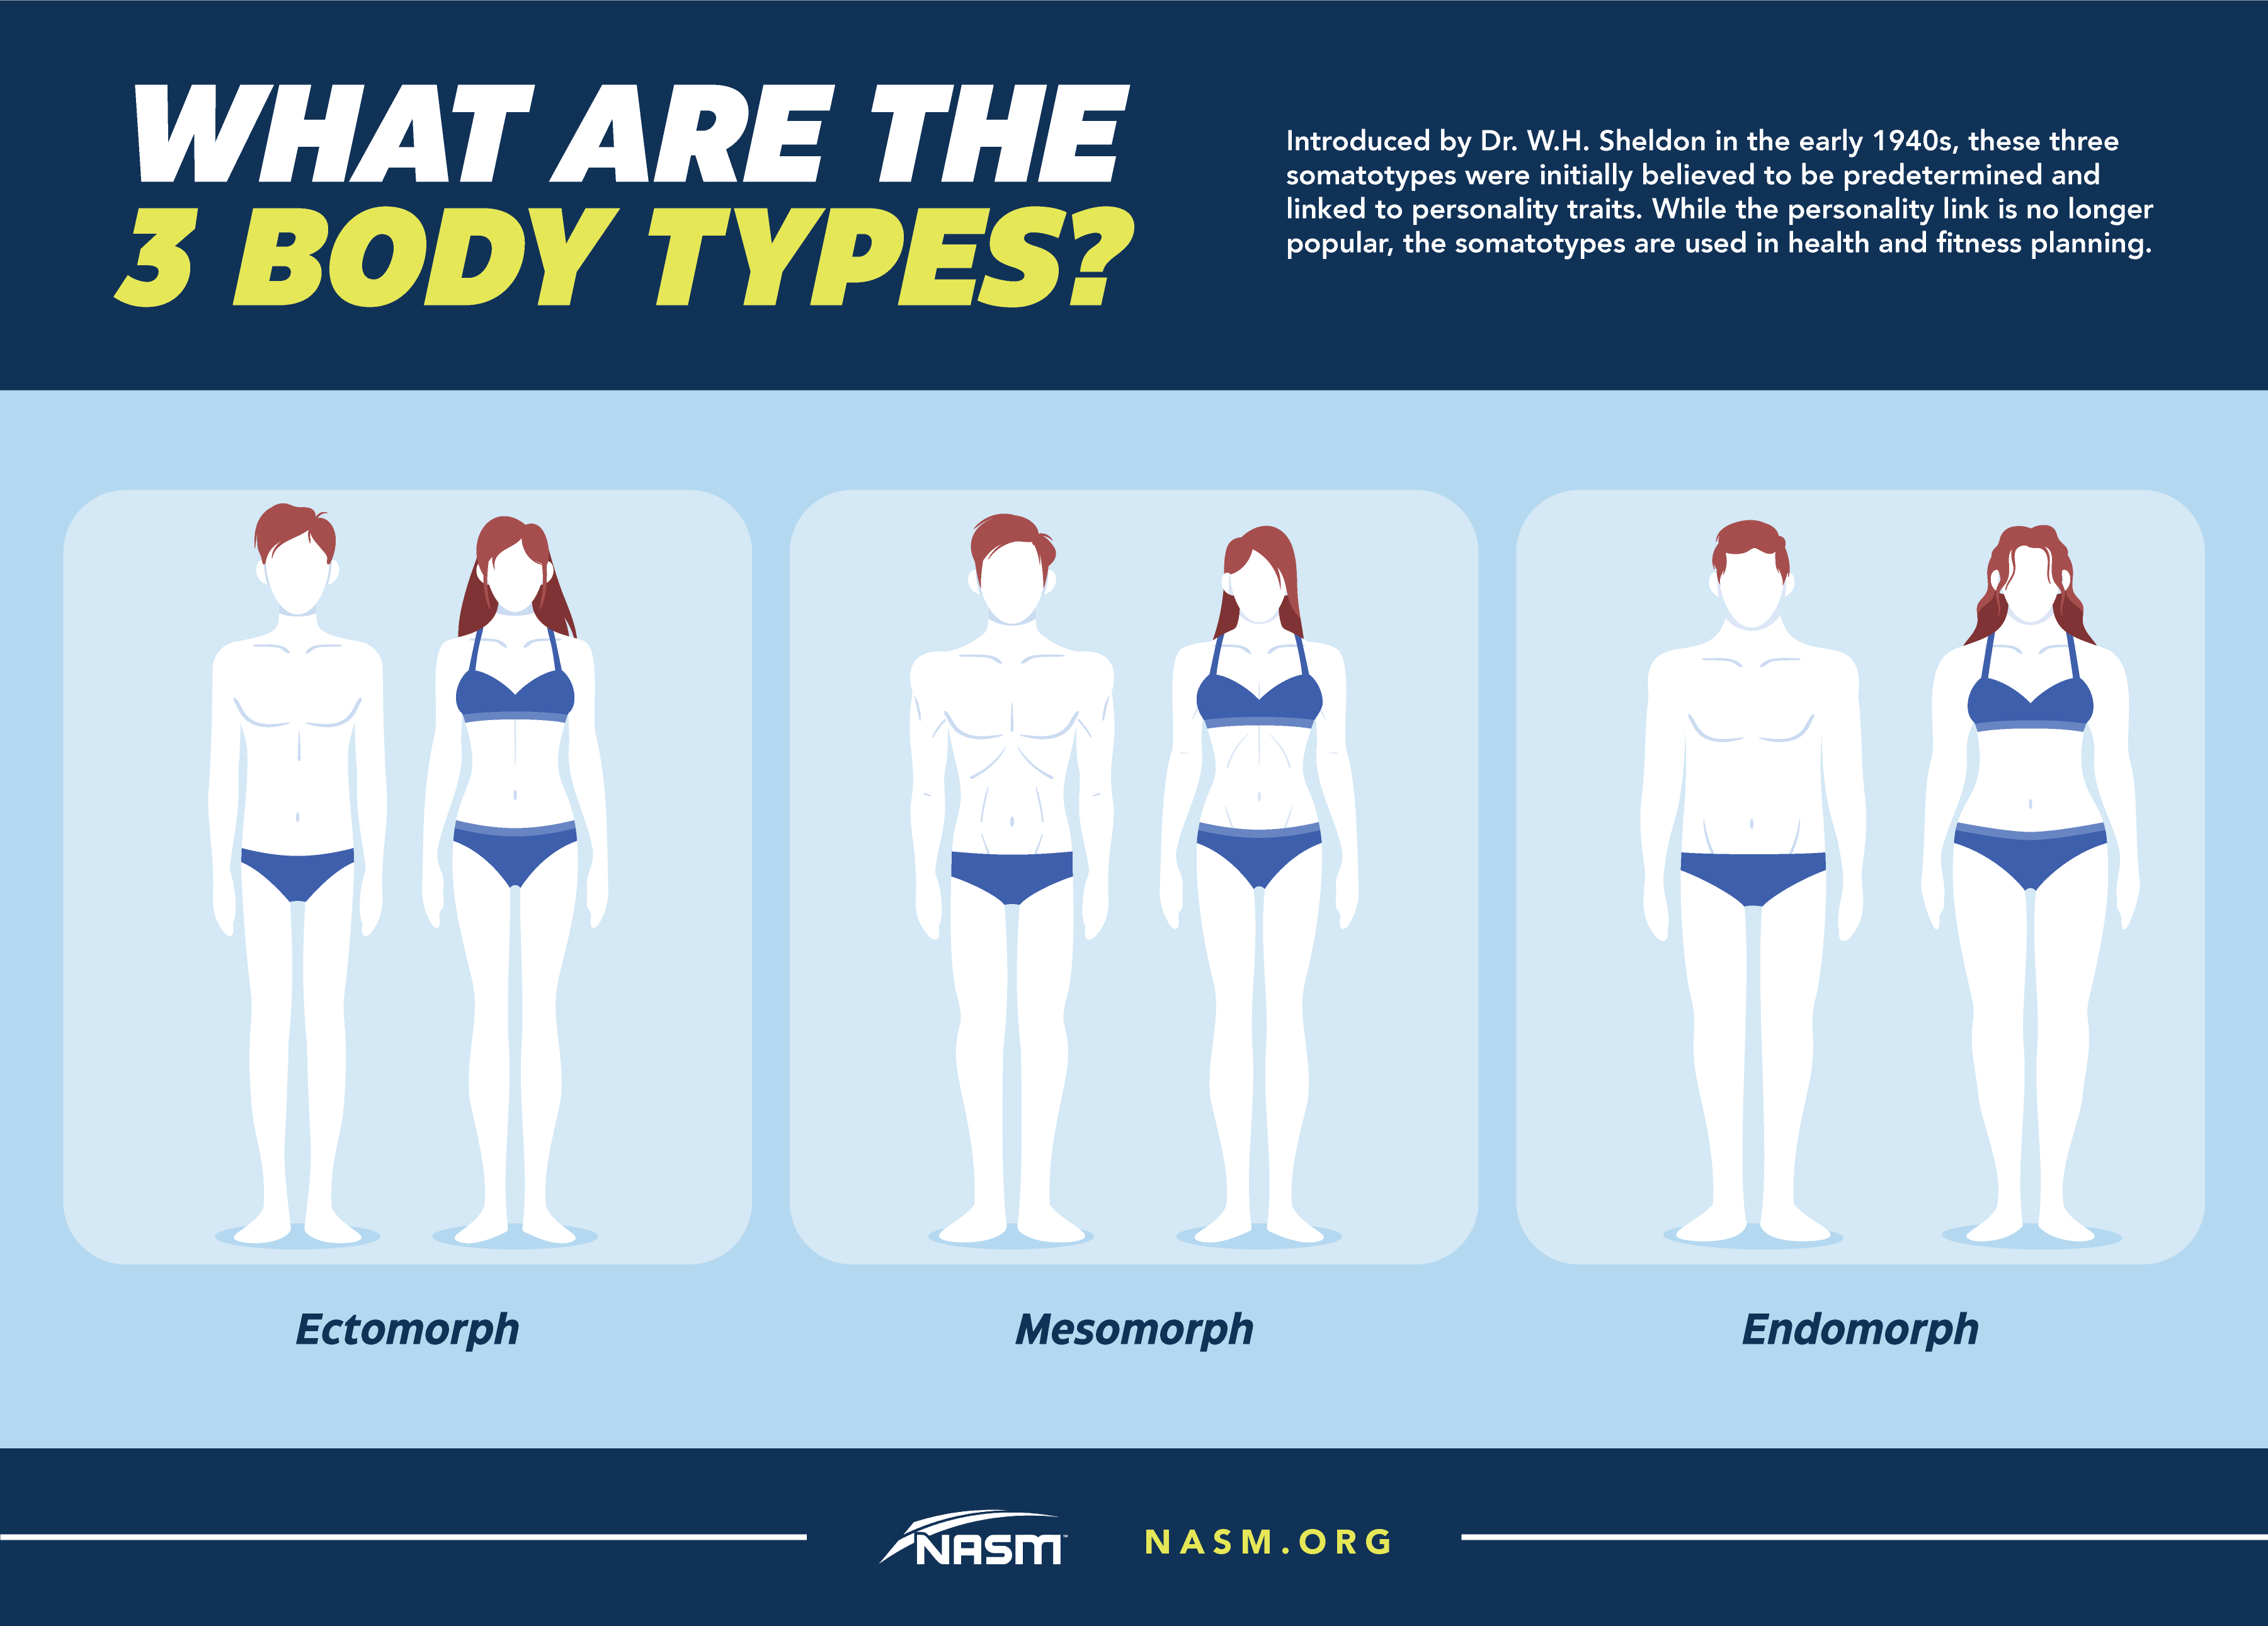 Why do people have different body types even though they're doing